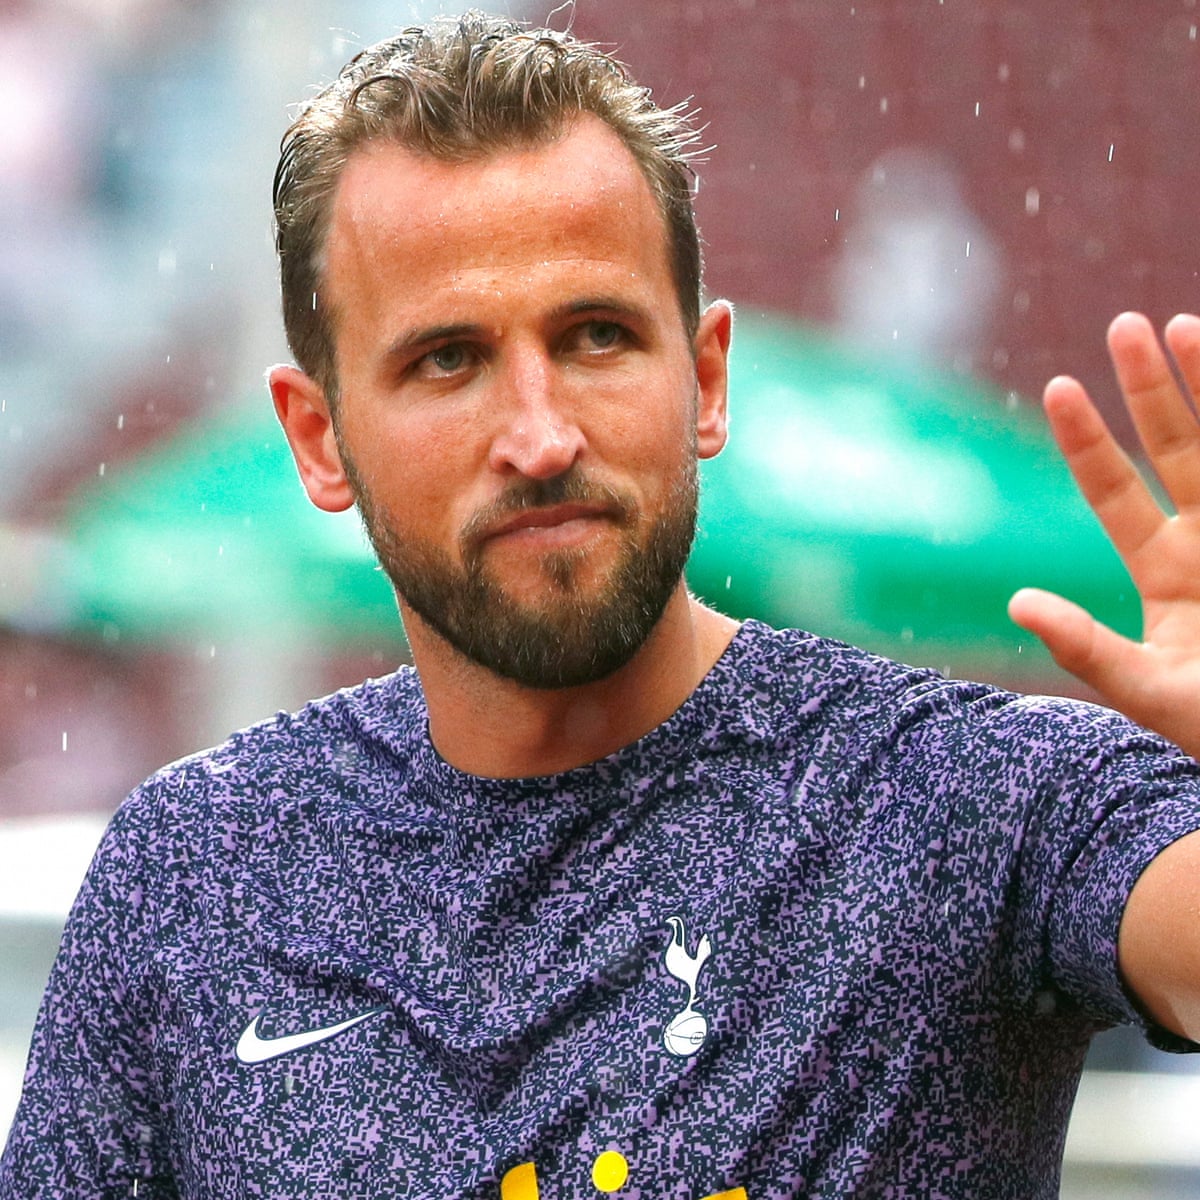 Manchester United could revive interest in Harry Kane after Spurs decision | Manchester United | The Guardian